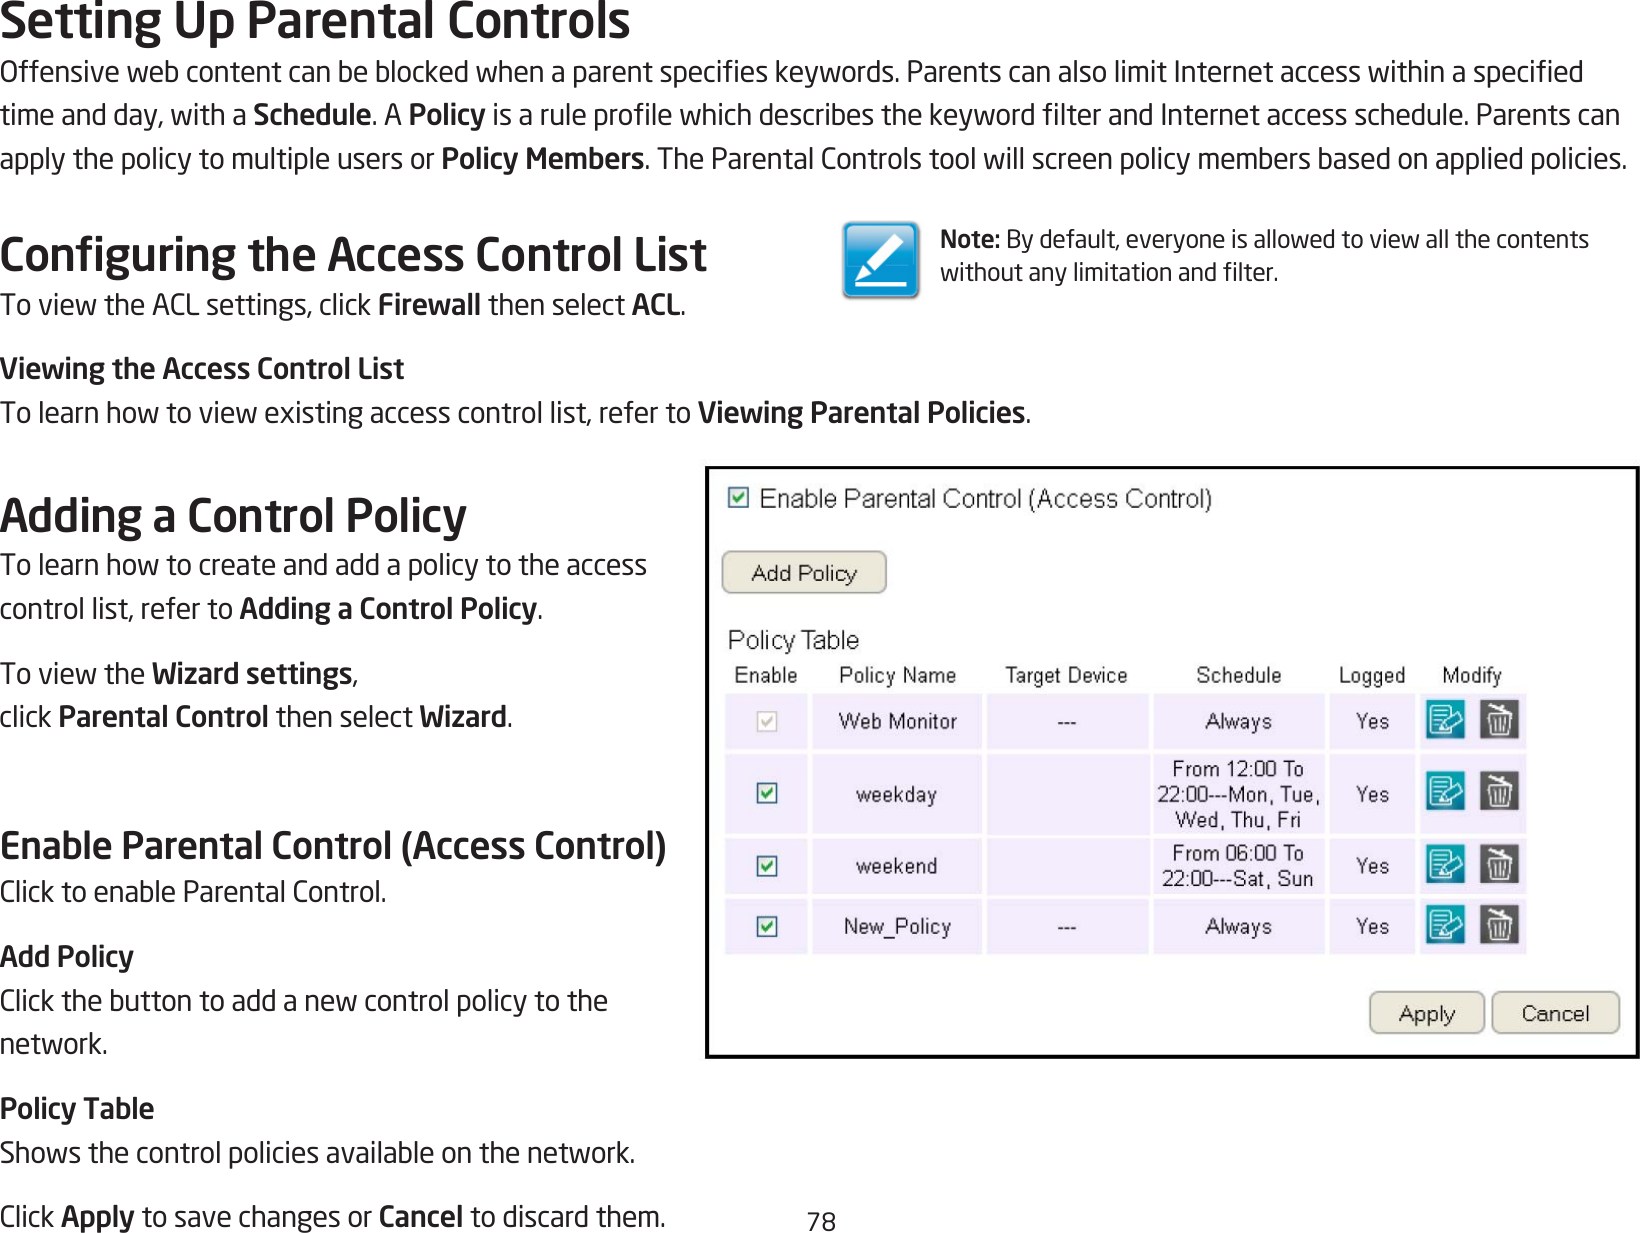 78Setting Up Parental ControlsOffensivewebcontentcanbeblockedwhenaparentspecieskeywords.ParentscanalsolimitInternetaccesswithinaspeciedtimeandday,withaSchedule. A PolicyisaruleprolewhichdescribesthekeywordlterandInternetaccessschedule.Parentscanapply the policy to multiple users or Policy Members.TheParentalControlstoolwillscreenpolicymembersbasedonappliedpolicies.Conguring the Access Control ListToviewtheACLsettings,clickFirewall then select ACL.Viewing the Access Control ListTolearnhowtoviewexistingaccesscontrollist,refertoViewing Parental Policies.Adding a Control PolicyTolearnhowtocreateandaddapolicytotheaccesscontrol list, refer to Adding a Control Policy.ToviewtheWizard settings, click Parental Control then select Wizard.Enable Parental Control (Access Control)ClicktoenableParentalControl.Add PolicyClickthebuttontoaddanewcontrolpolicytothenetwork.Policy TableShowsthecontrolpoliciesavailableonthenetwork.ClickApply to save changes or Cancel to discard them.Note:Bydefault,everyoneisallowedtoviewallthecontentswithoutanylimitationandlter.